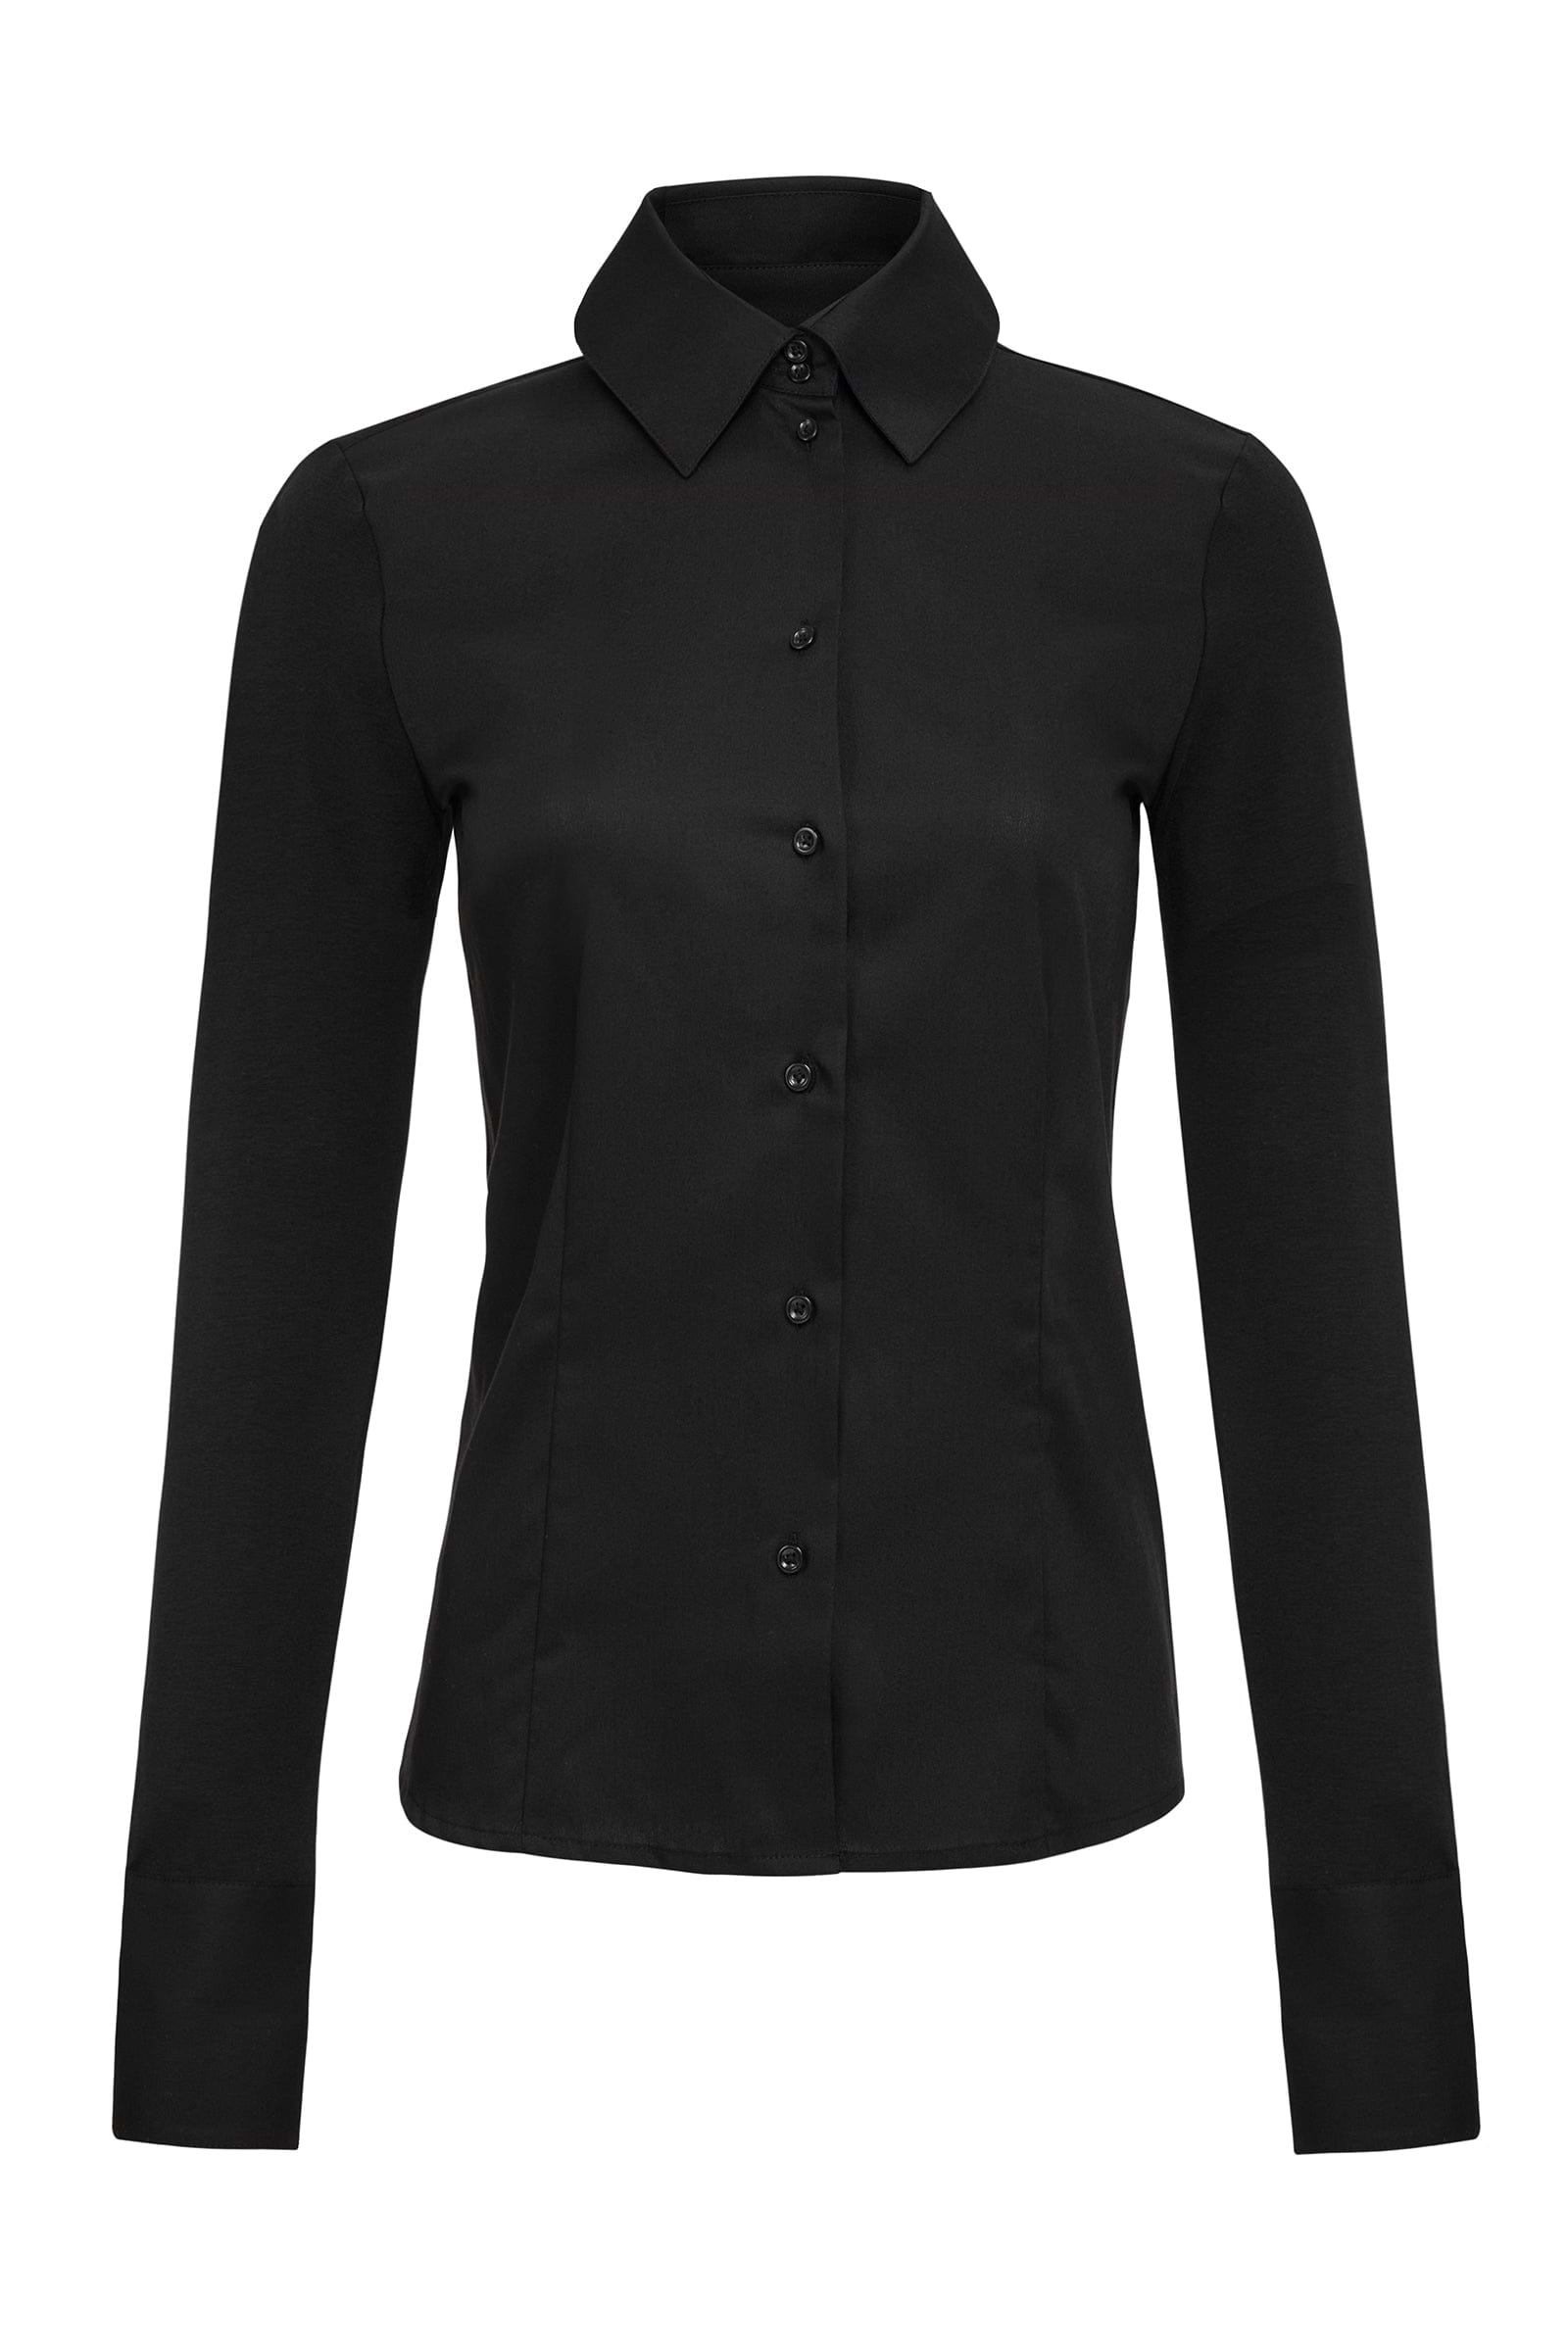 The Best Travel Shirt. Woman Showing the Front Profile of a Alida Button Down Poplin Shirt in Black